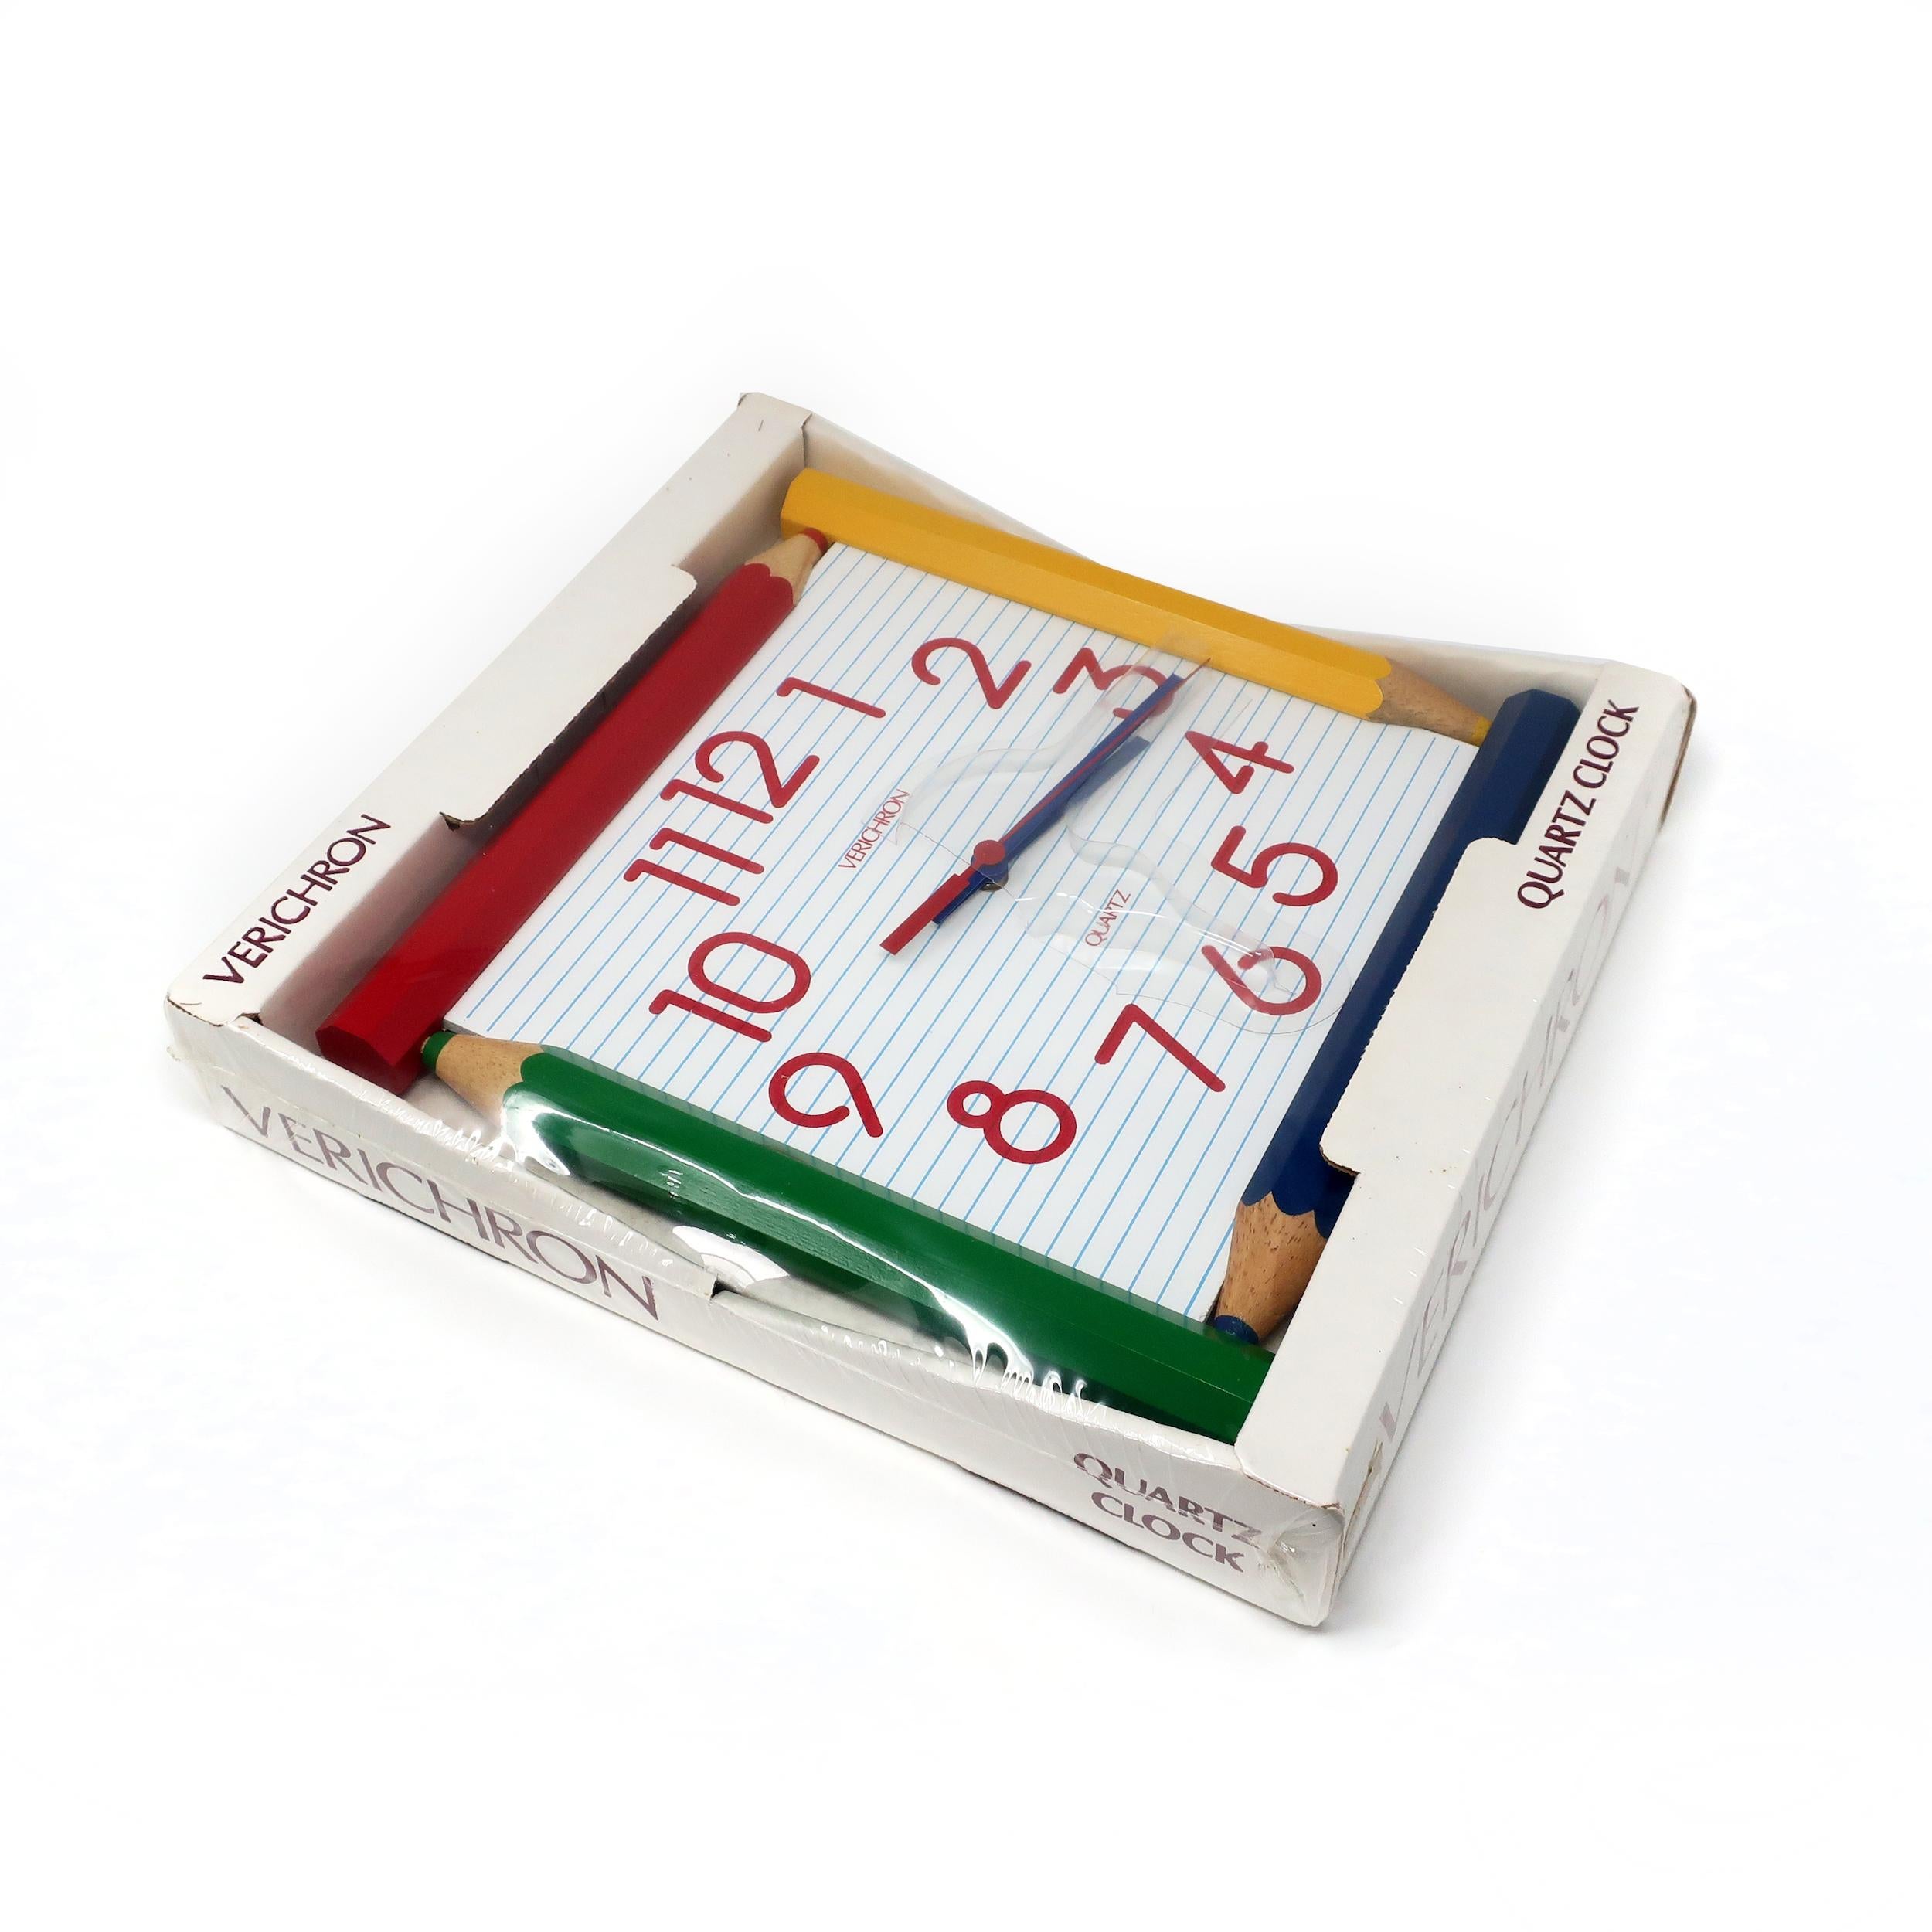 A fun 1980s wall clock by Verichron (a Harris & Mallow brand) with a face that resembles lined notebook paper, a four-colored wooden pencil frame, red numbers in a 1970s/80s font, and blue and red hands.  Bright, primary-colored, and whimsical. 